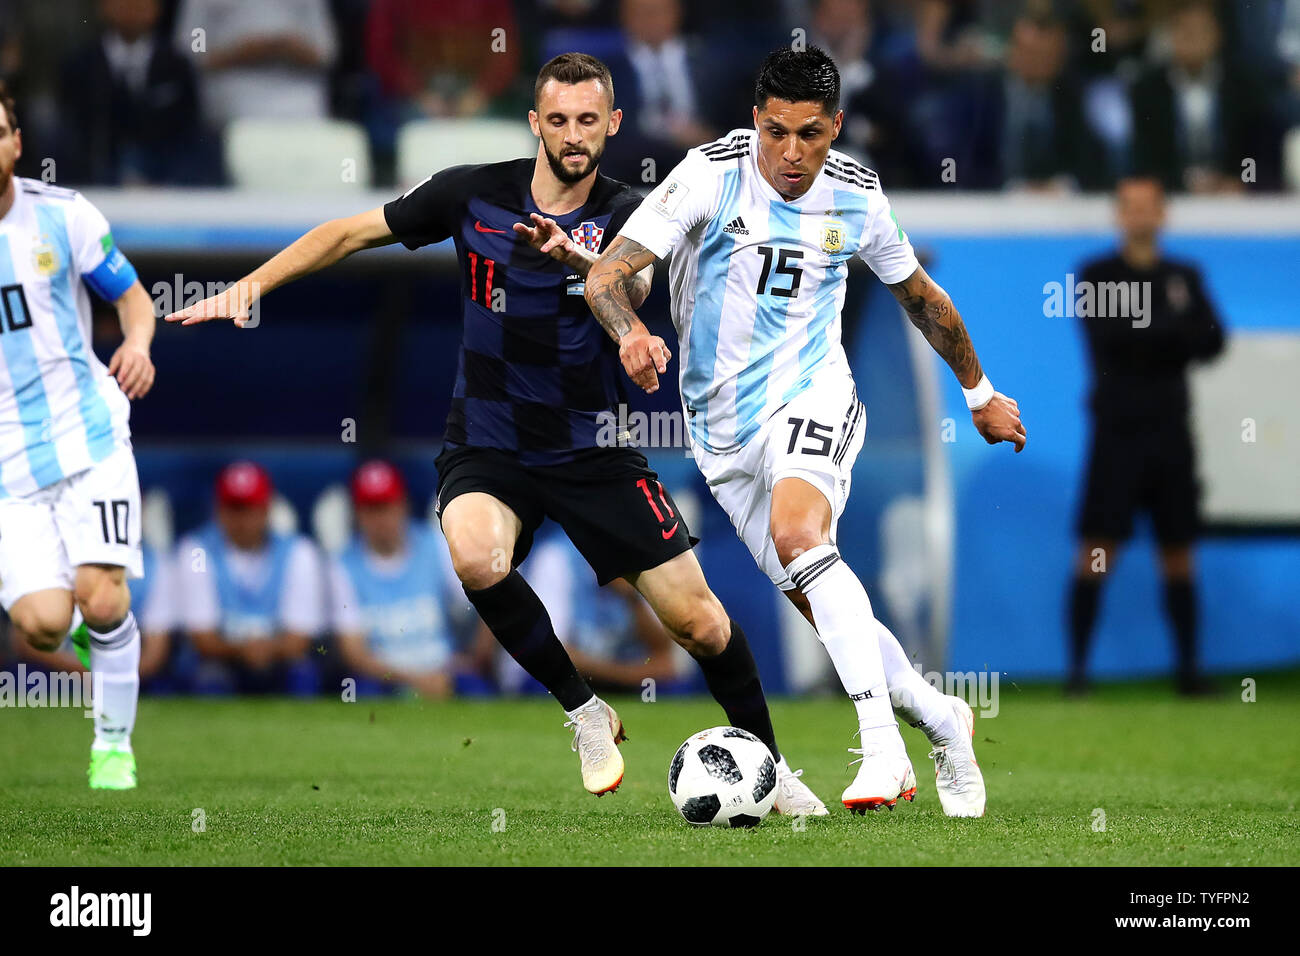 Enzo Perez of Argentina (R) in action with Marcelo Brozovic of Croatia during the 2018 FIFA World Cup Group D match at the Nizhny Novgorod Stadium in Nizhny Novgorod, Russia on June 21, 2018. Photo by Chris Brunskill/UPI Stock Photo